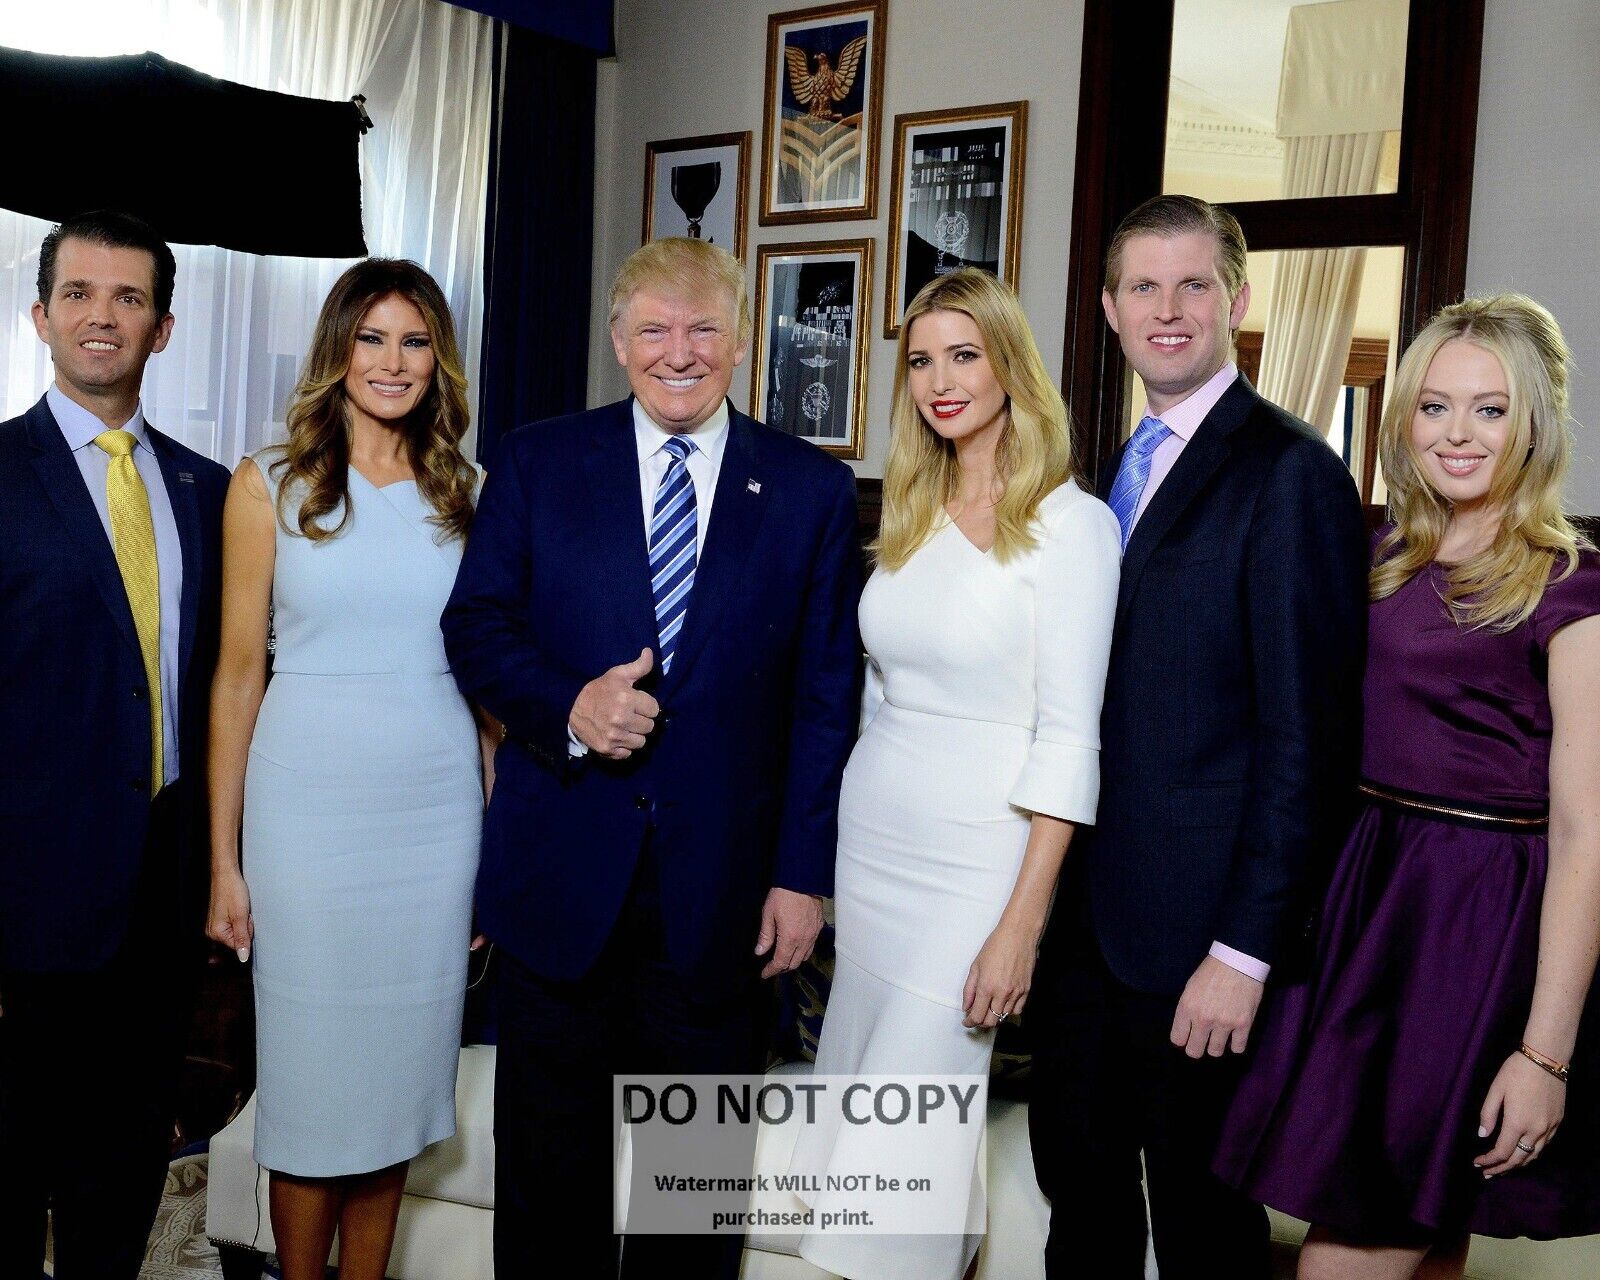 THE FAMILY OF DONALD TRUMP - 8X10 PHOTO (YW006)